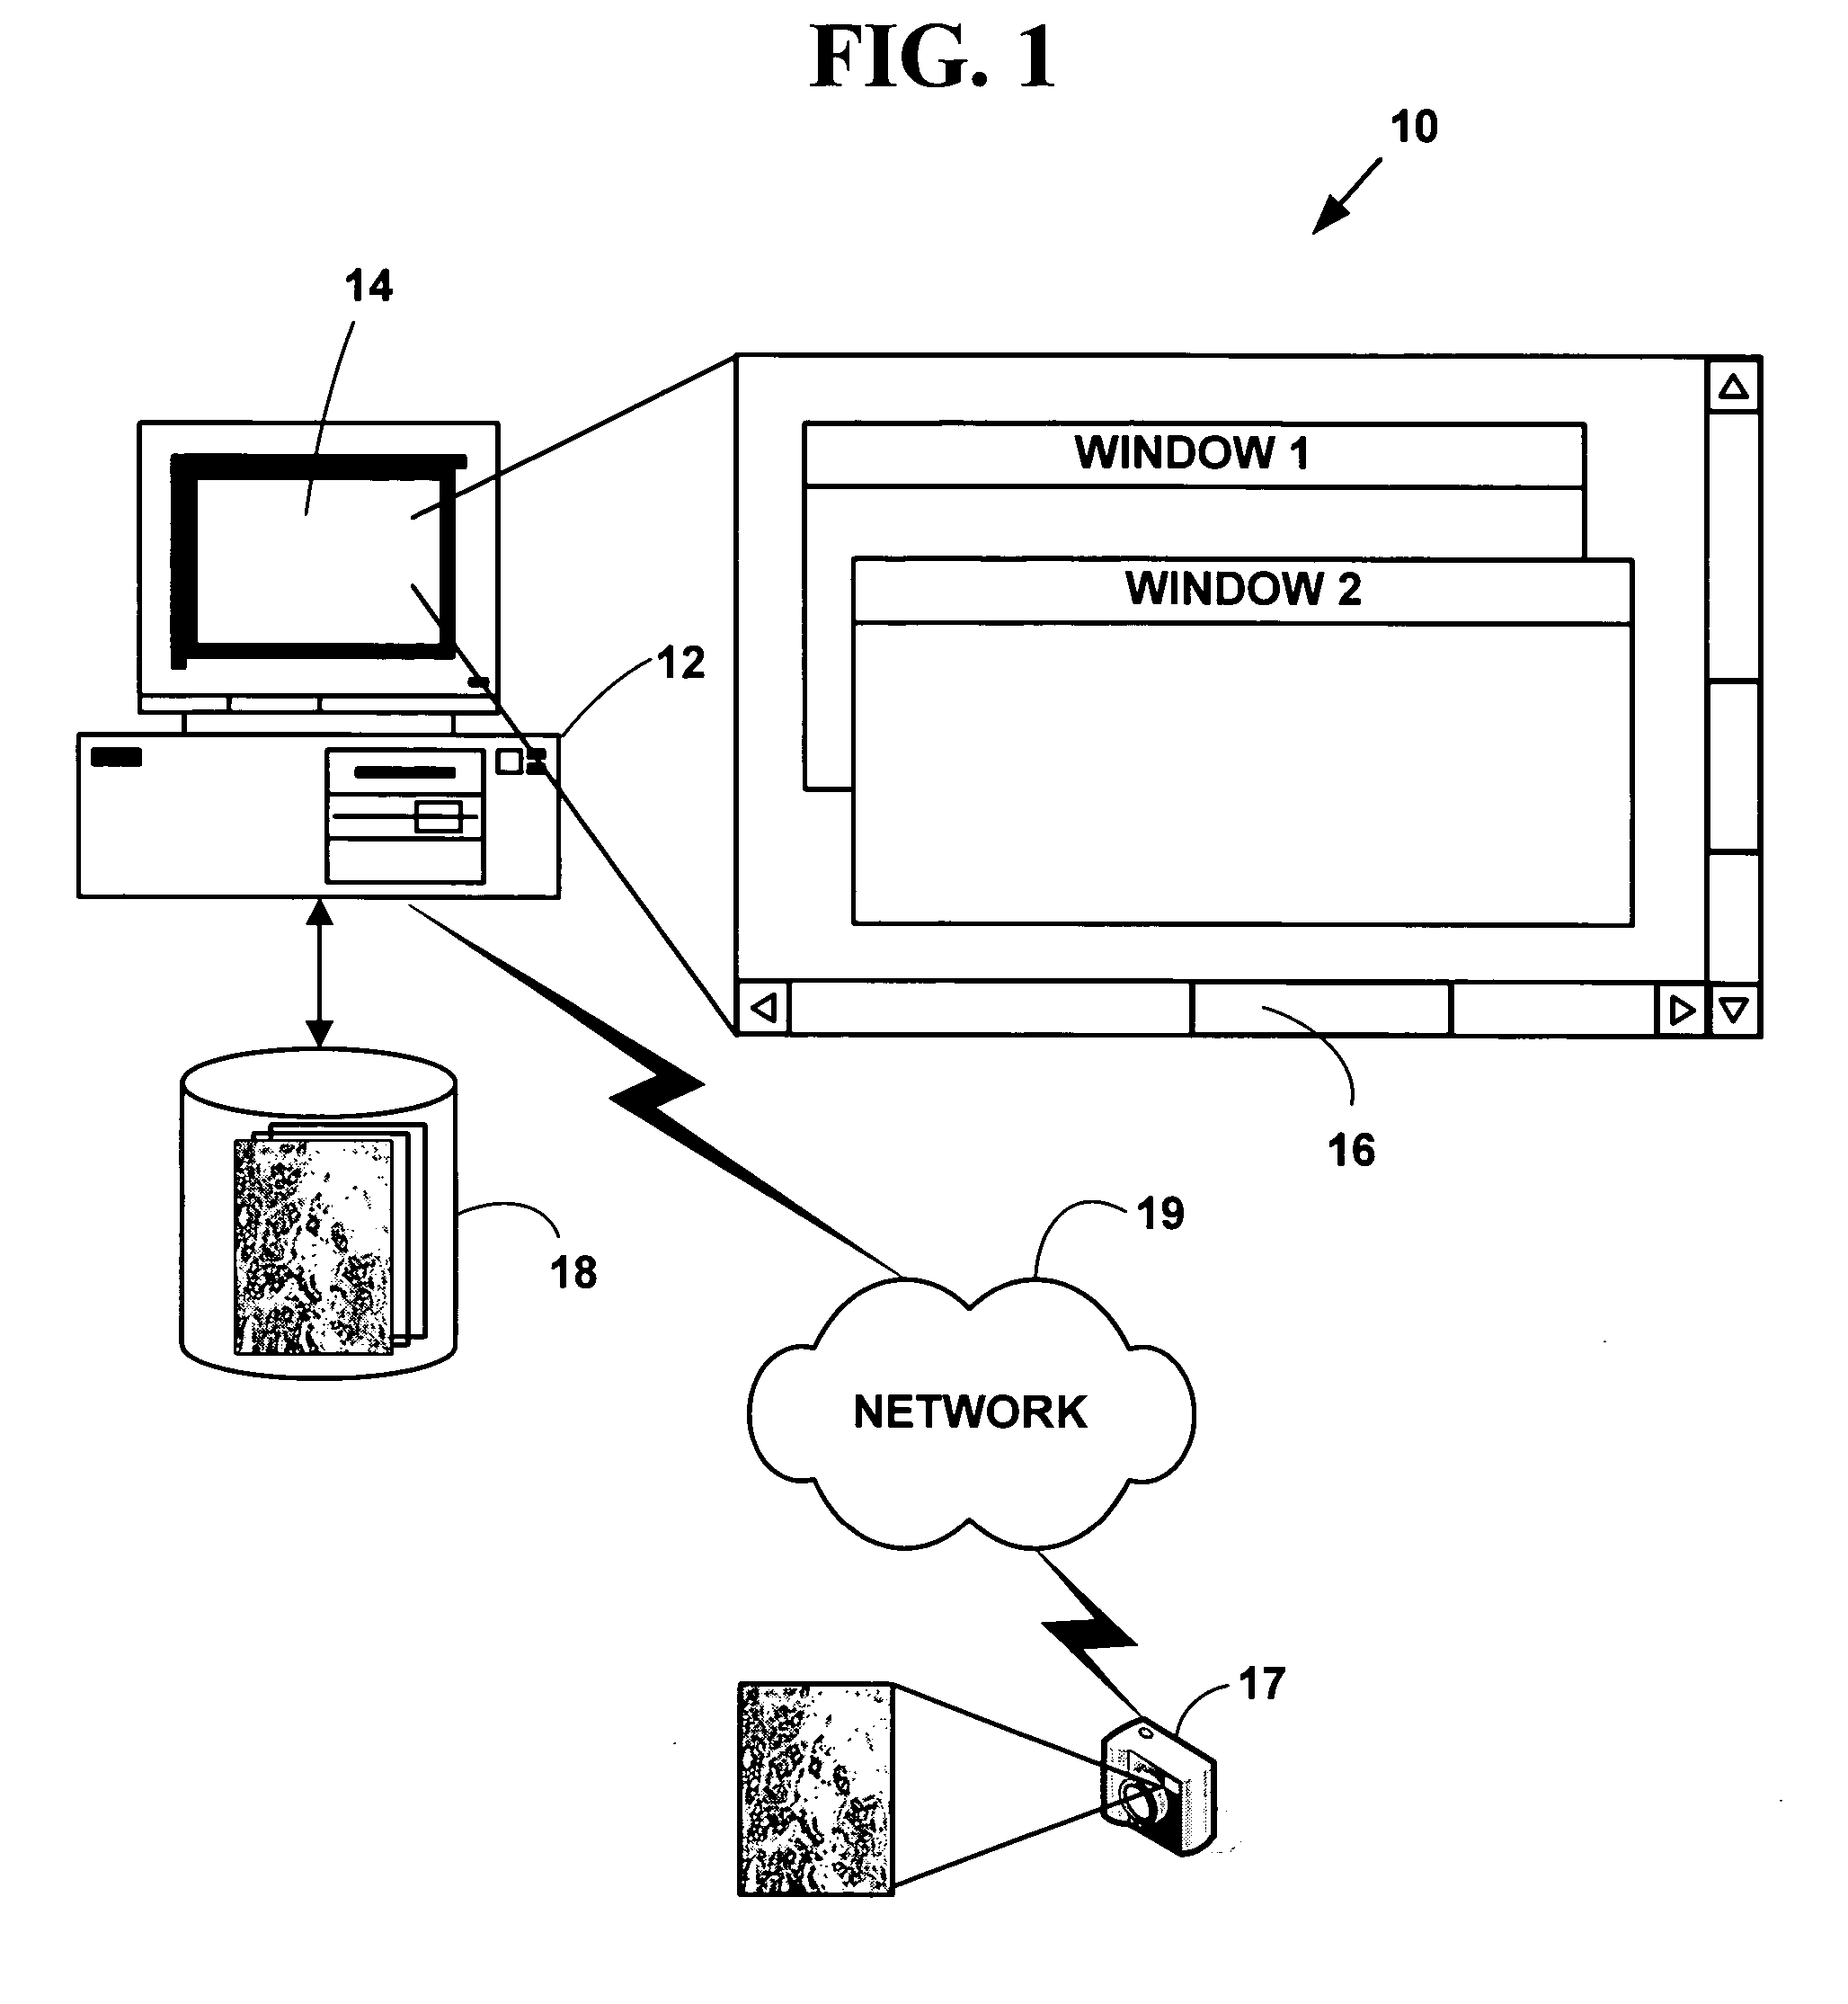 Method and system for automatically determining diagnostic saliency of digital images